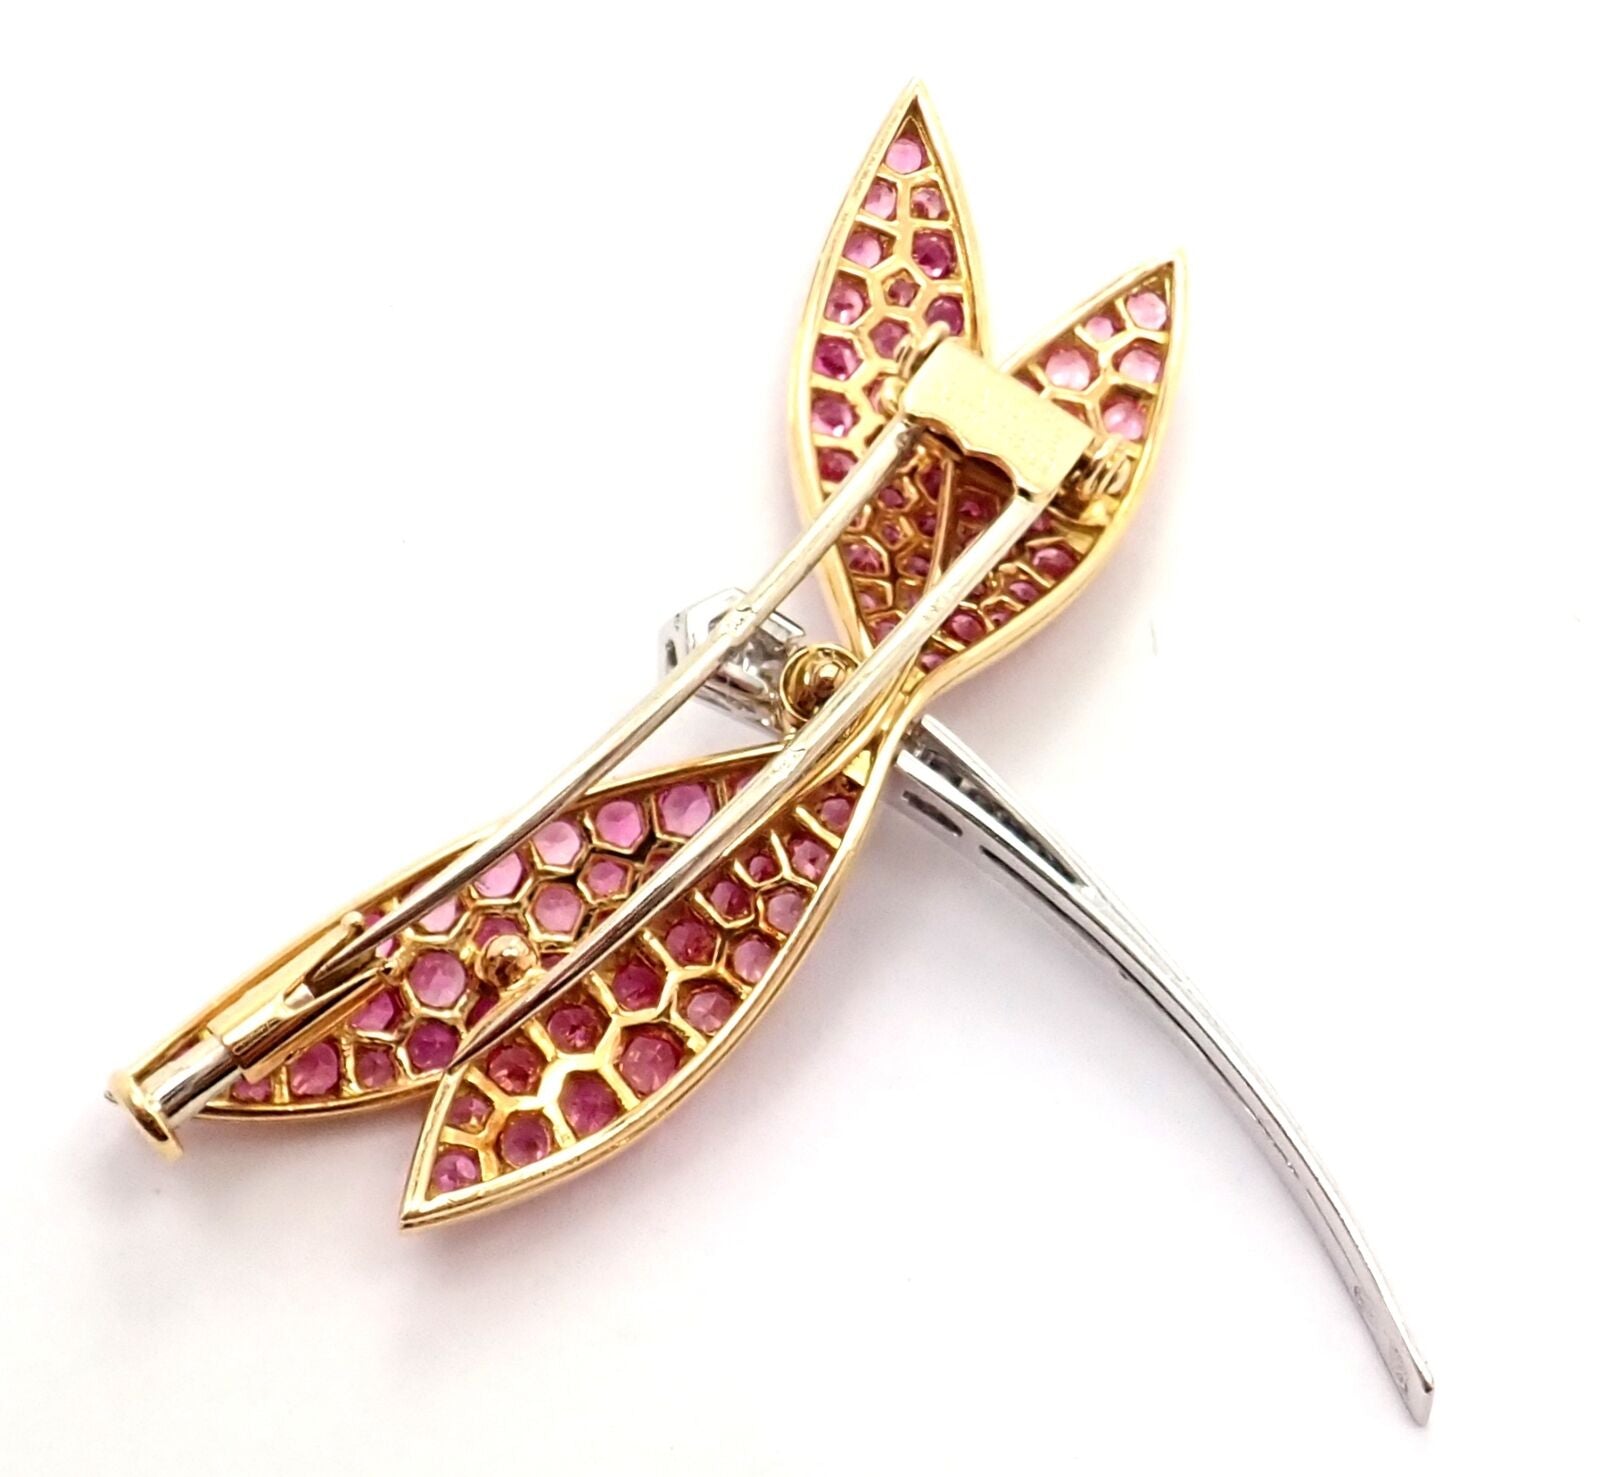 Van Cleef & Arpels Jewelry & Watches:Fine Jewelry:Brooches & Pins Authentic Van Cleef & Arpels Dragonfly 18k Gold Diamond Pink Sapphire Pin Brooch